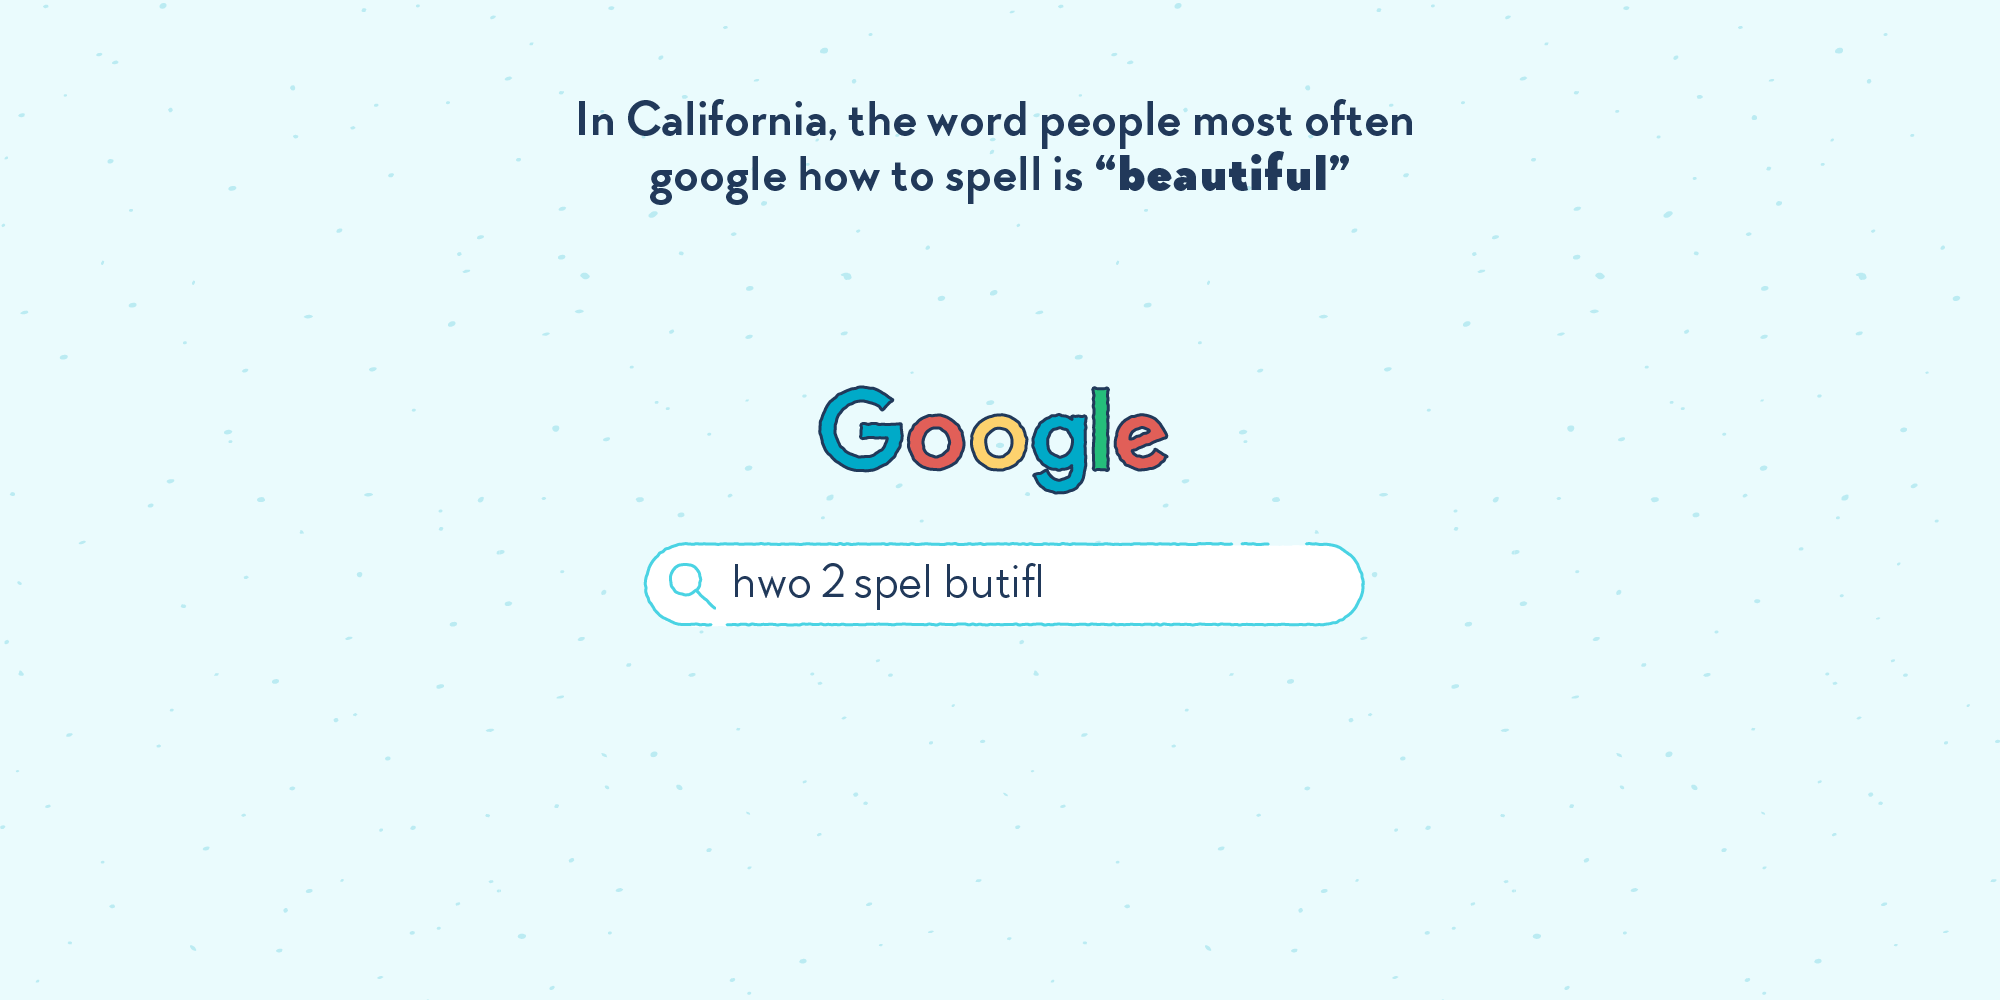 A Google search box with the misspelled sentence “hwo 2 spel butifl” typed into it.